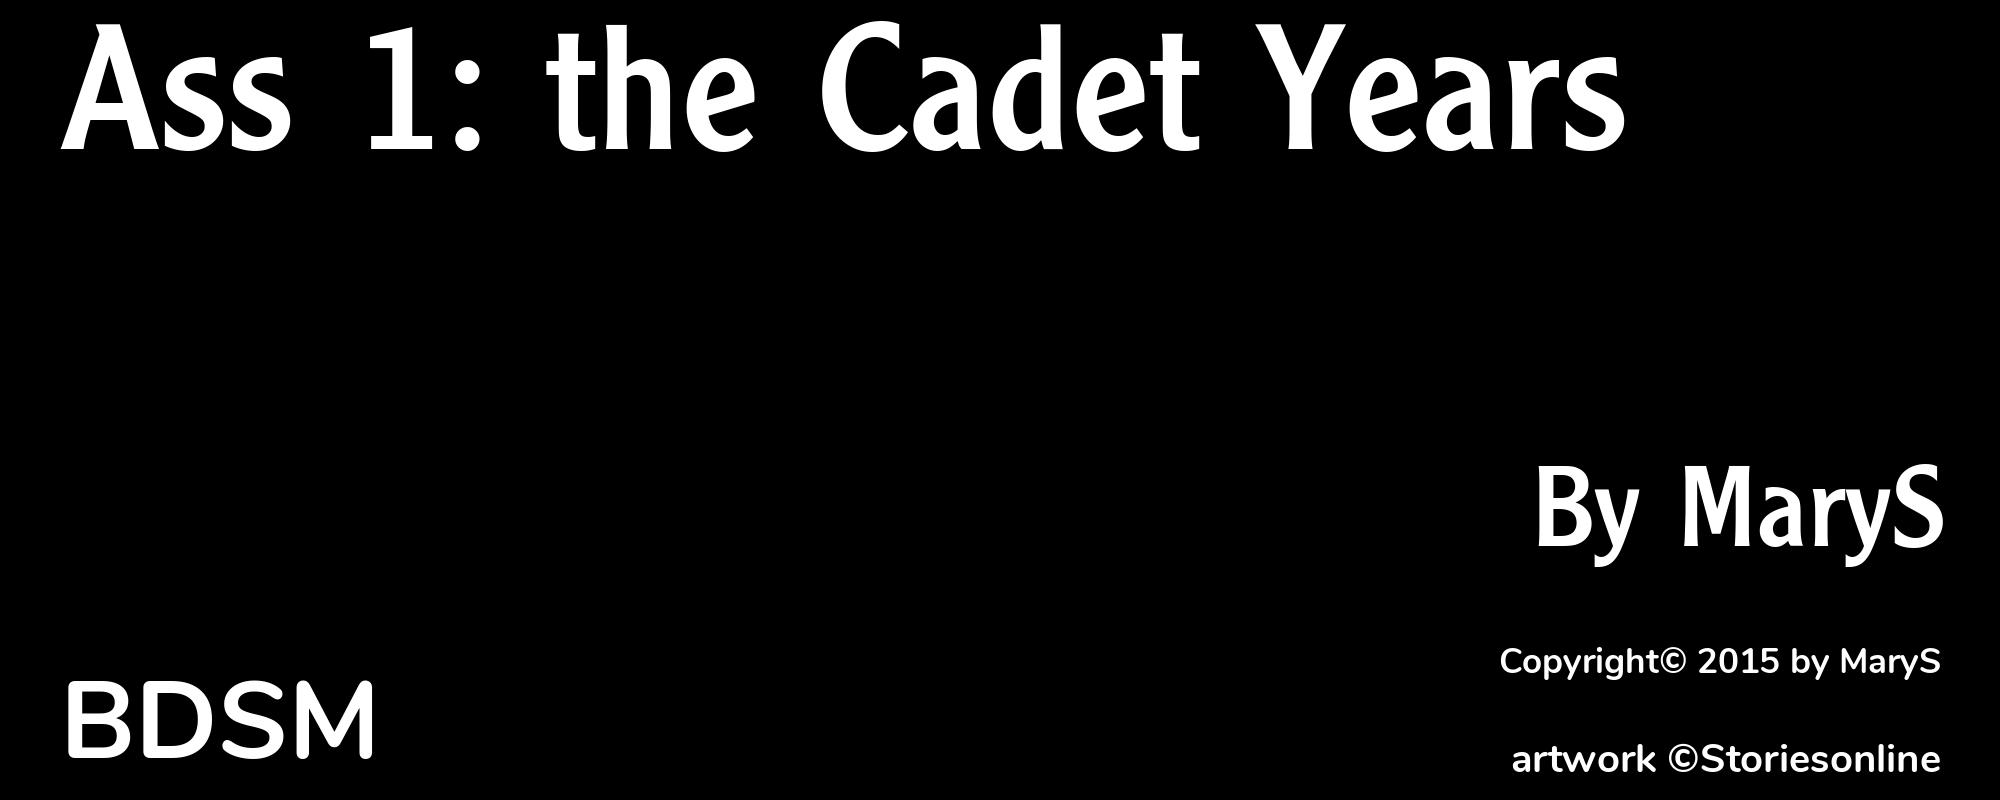 Ass 1: the Cadet Years - Cover